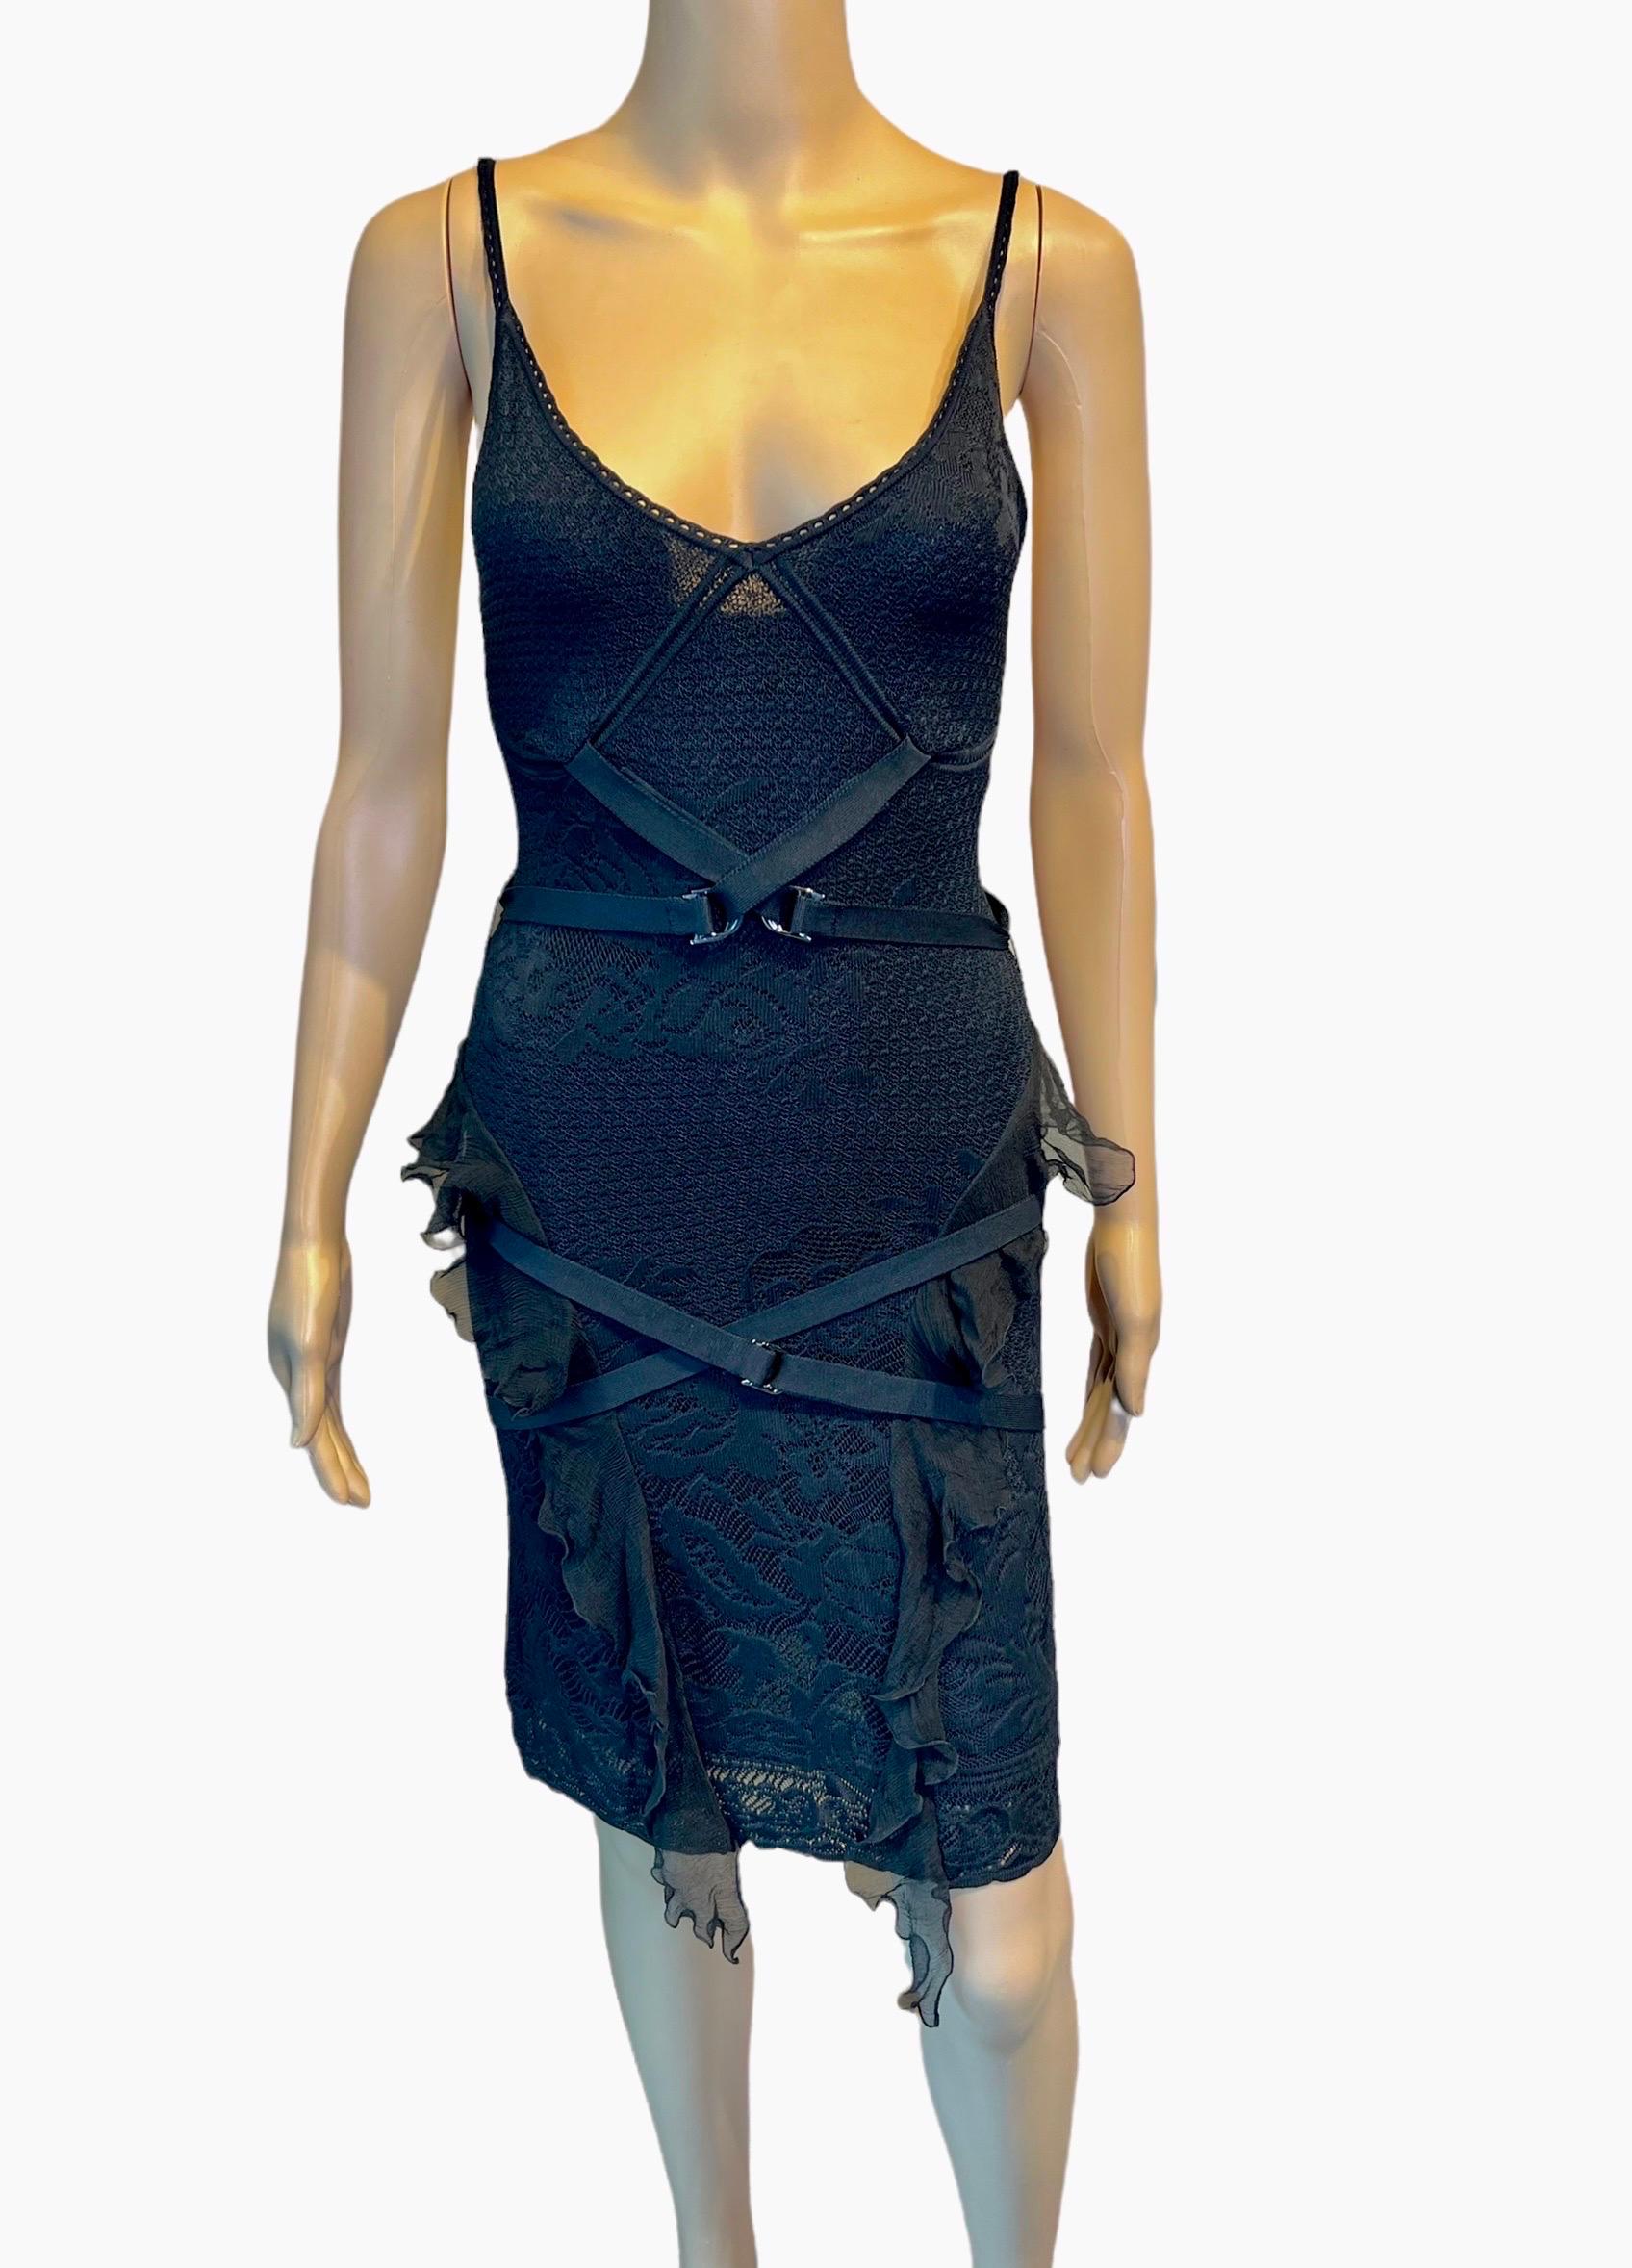 Christian Dior by John Galliano S/S 2003 Sheer Lace Bondage Knit Black Dress  In Good Condition For Sale In Naples, FL